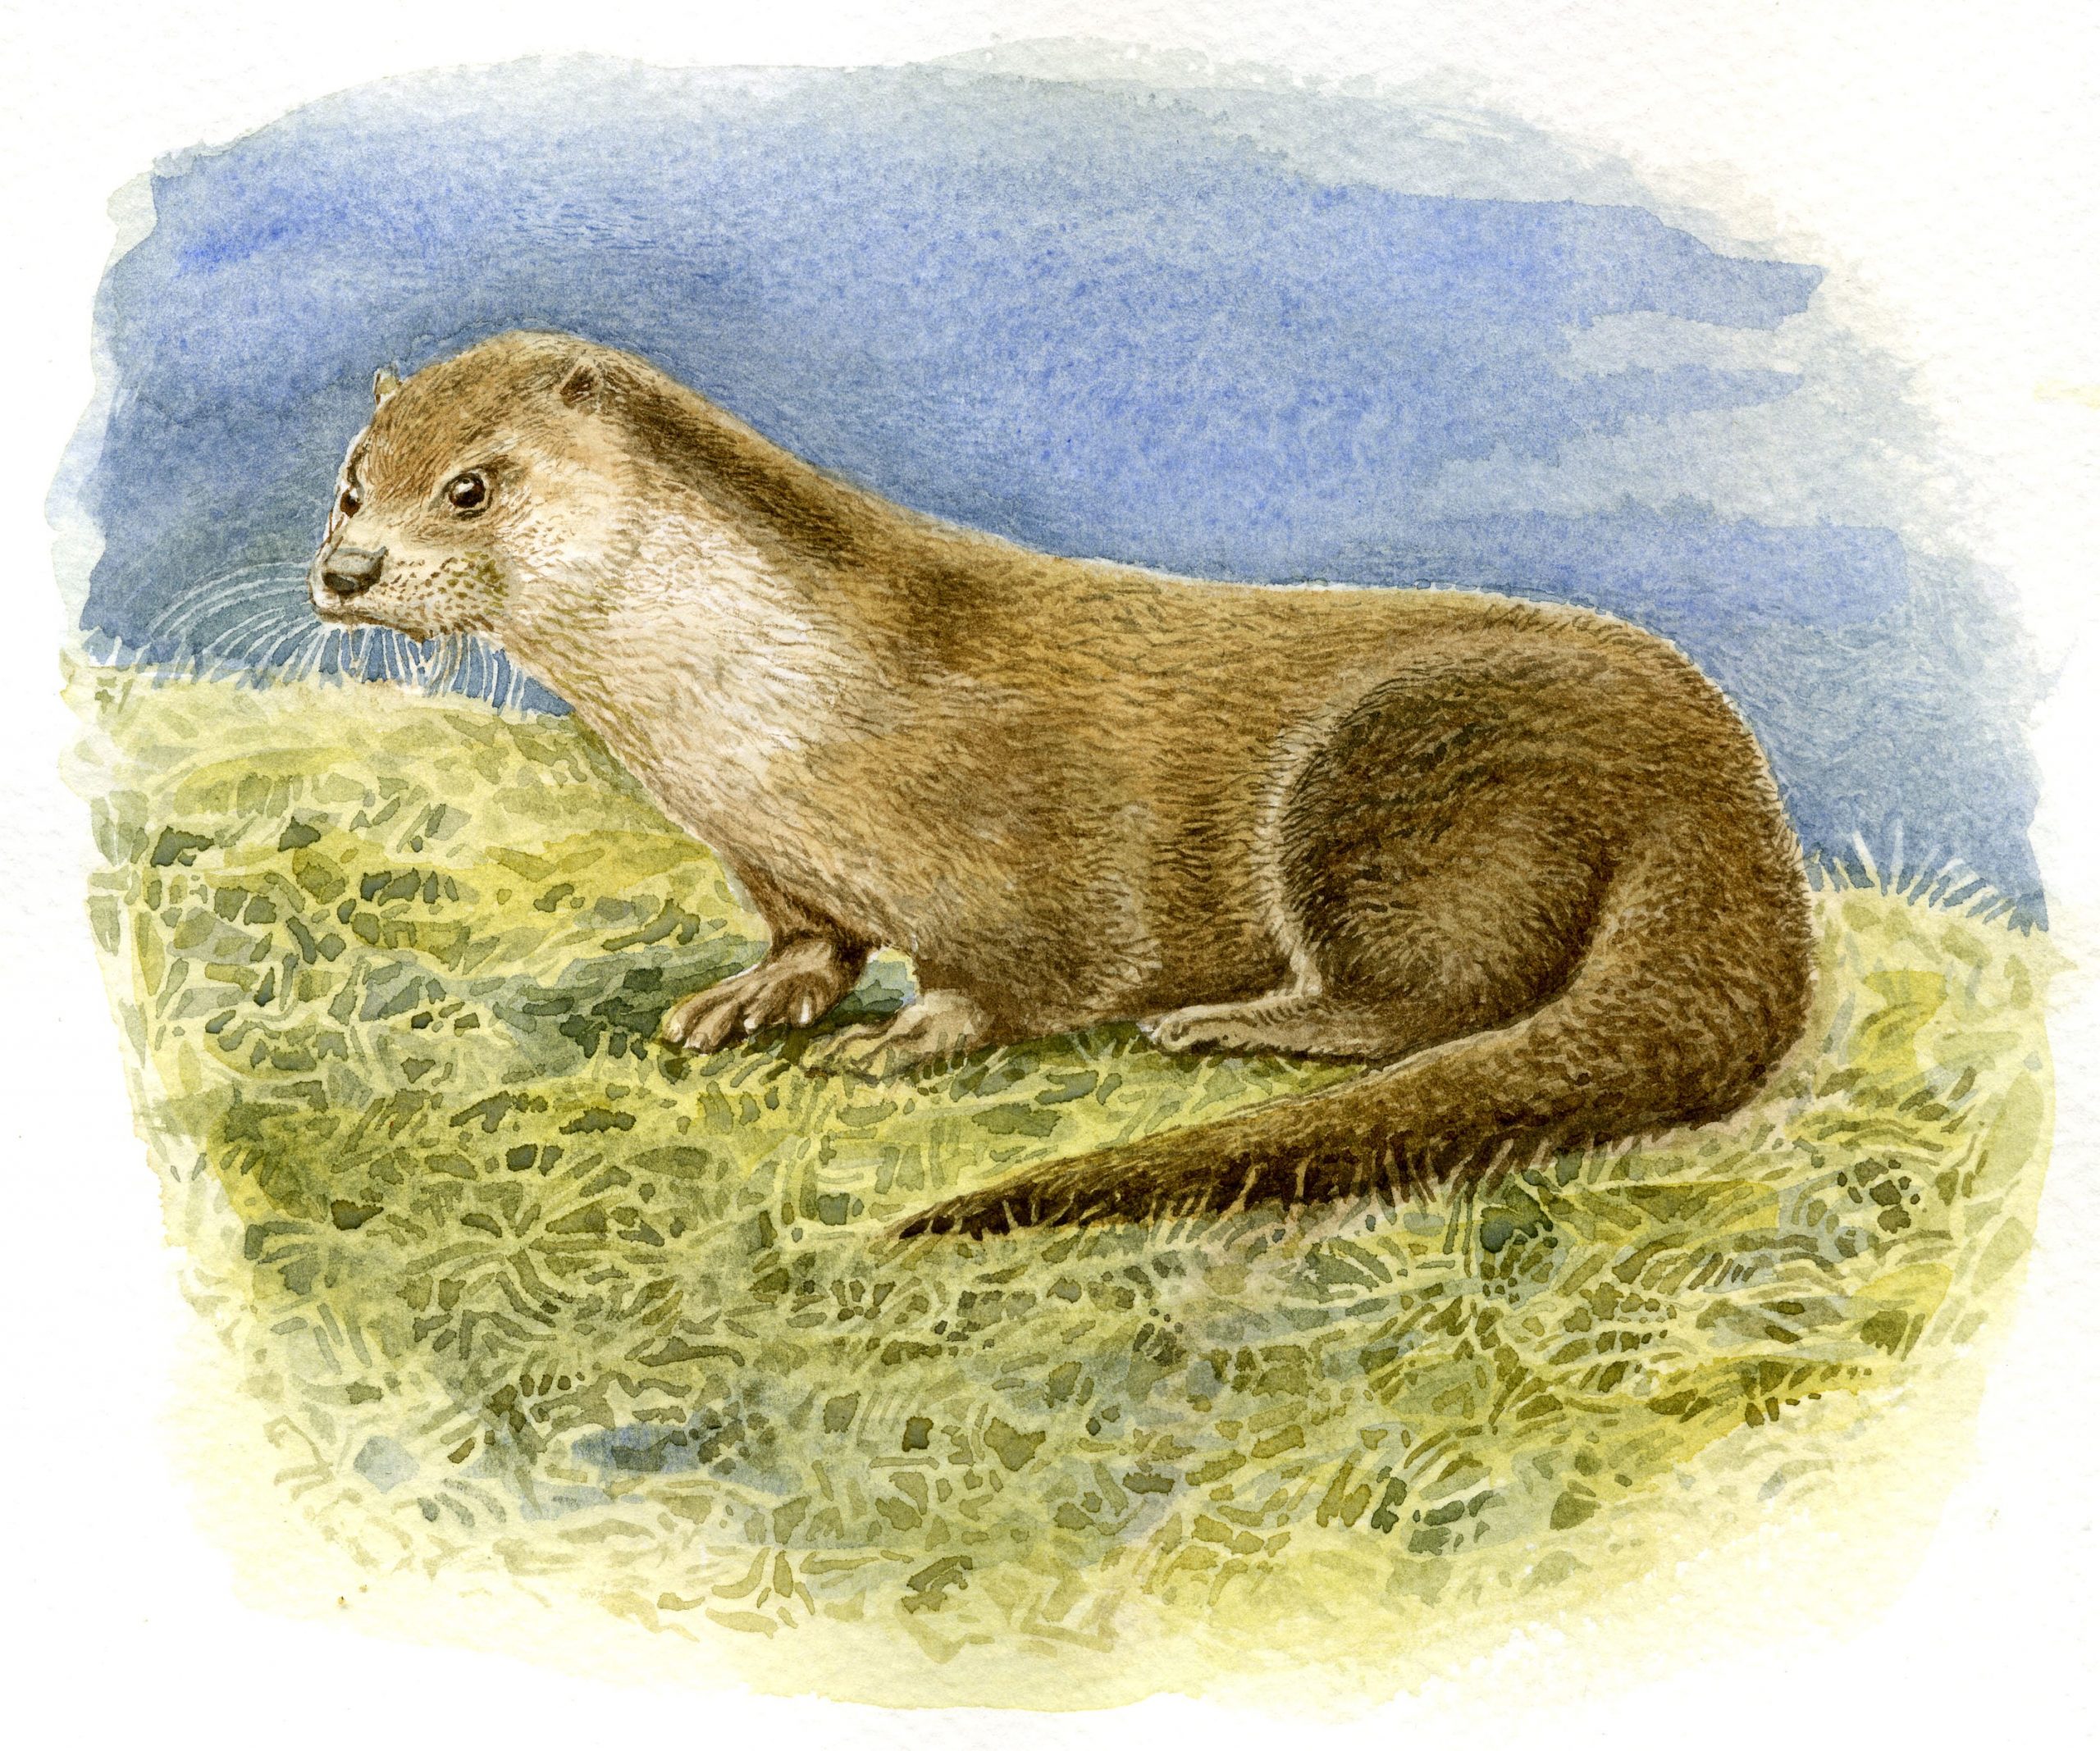 Watercolour painting of an otter